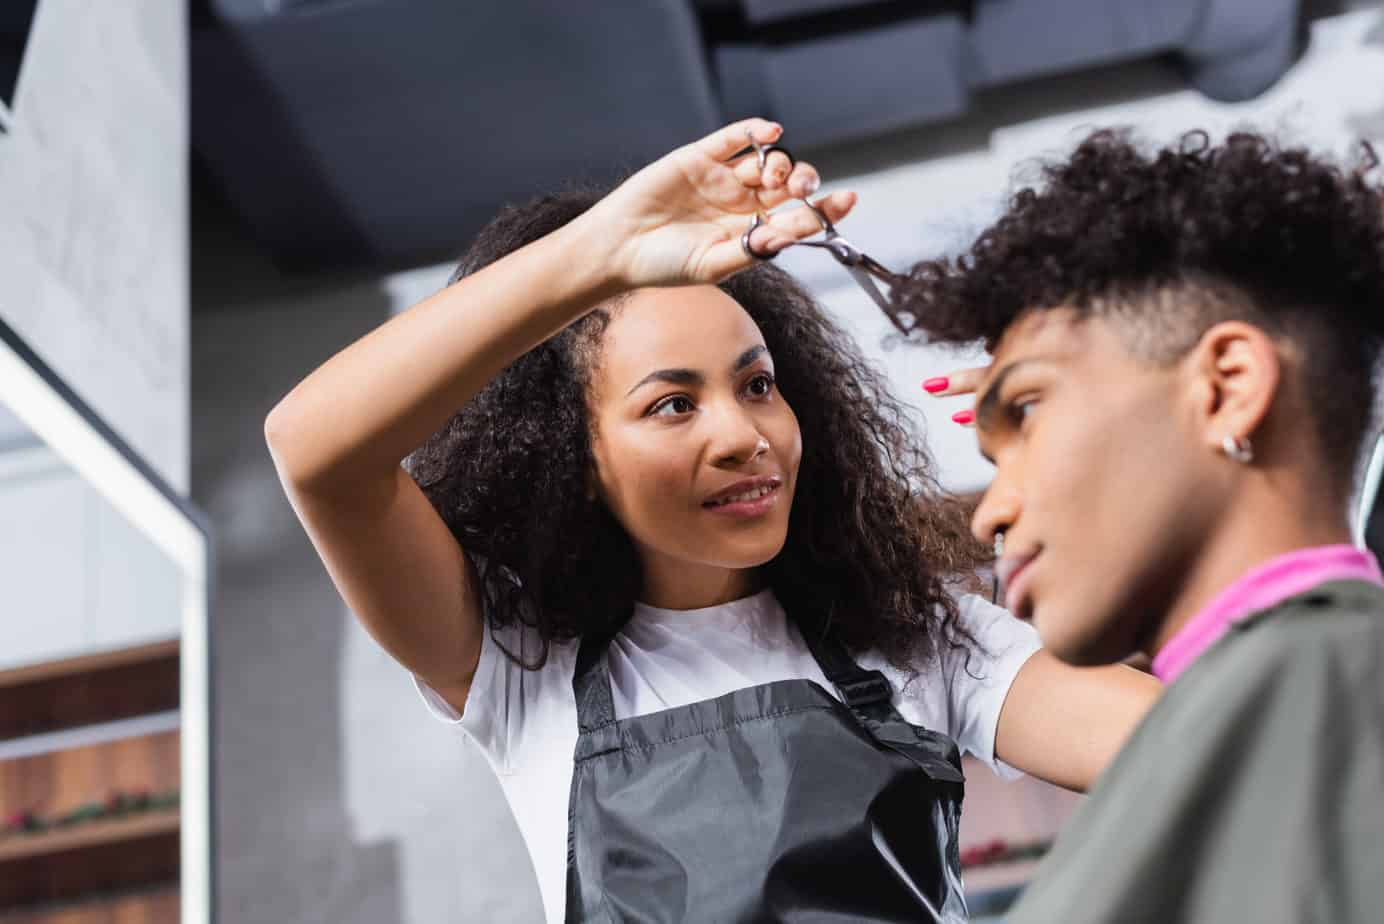 How To Get A Curly Hair Cut You'll Love + Curly Stylist Finder